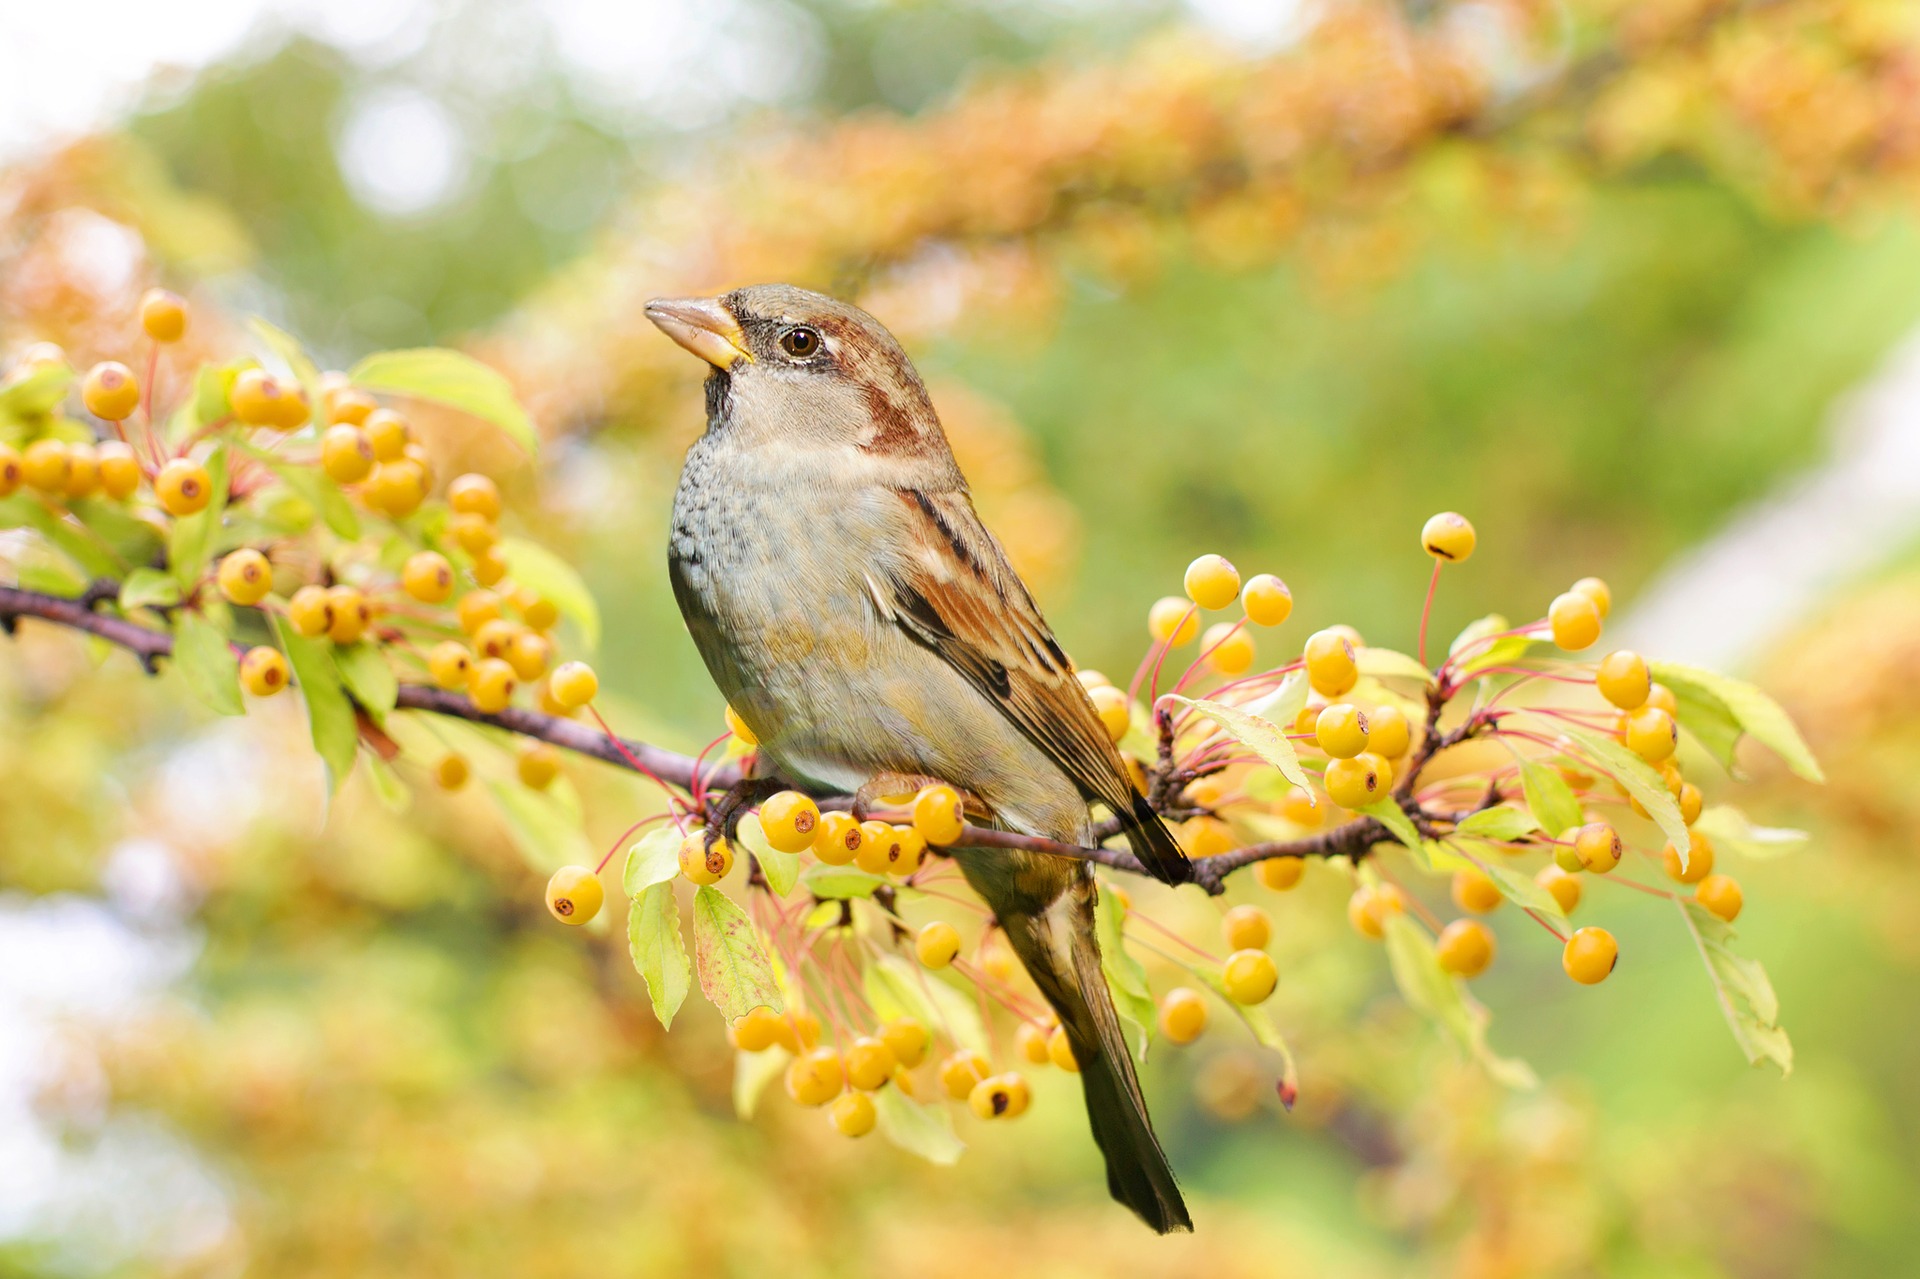 A brown and gray bird sitting on a tree branch with yellow berries.